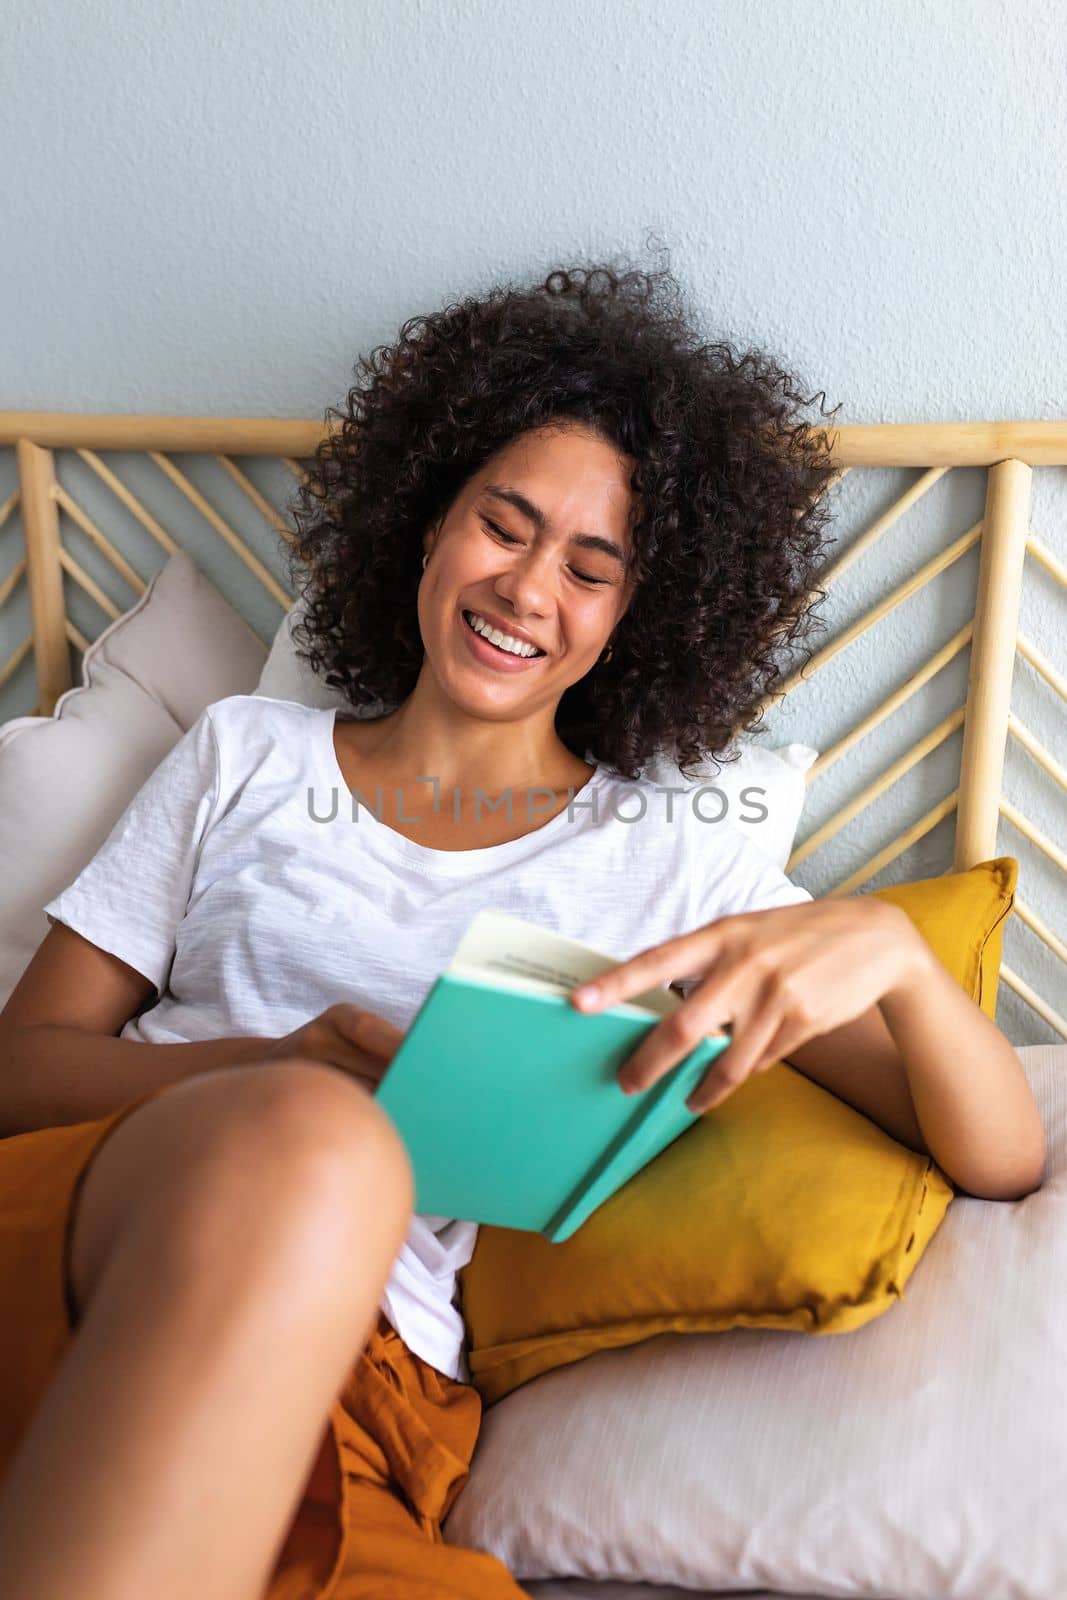 Vertical portrait of young African american woman with curly hair reading a book, laughing sitting comfortably on bed. by Hoverstock